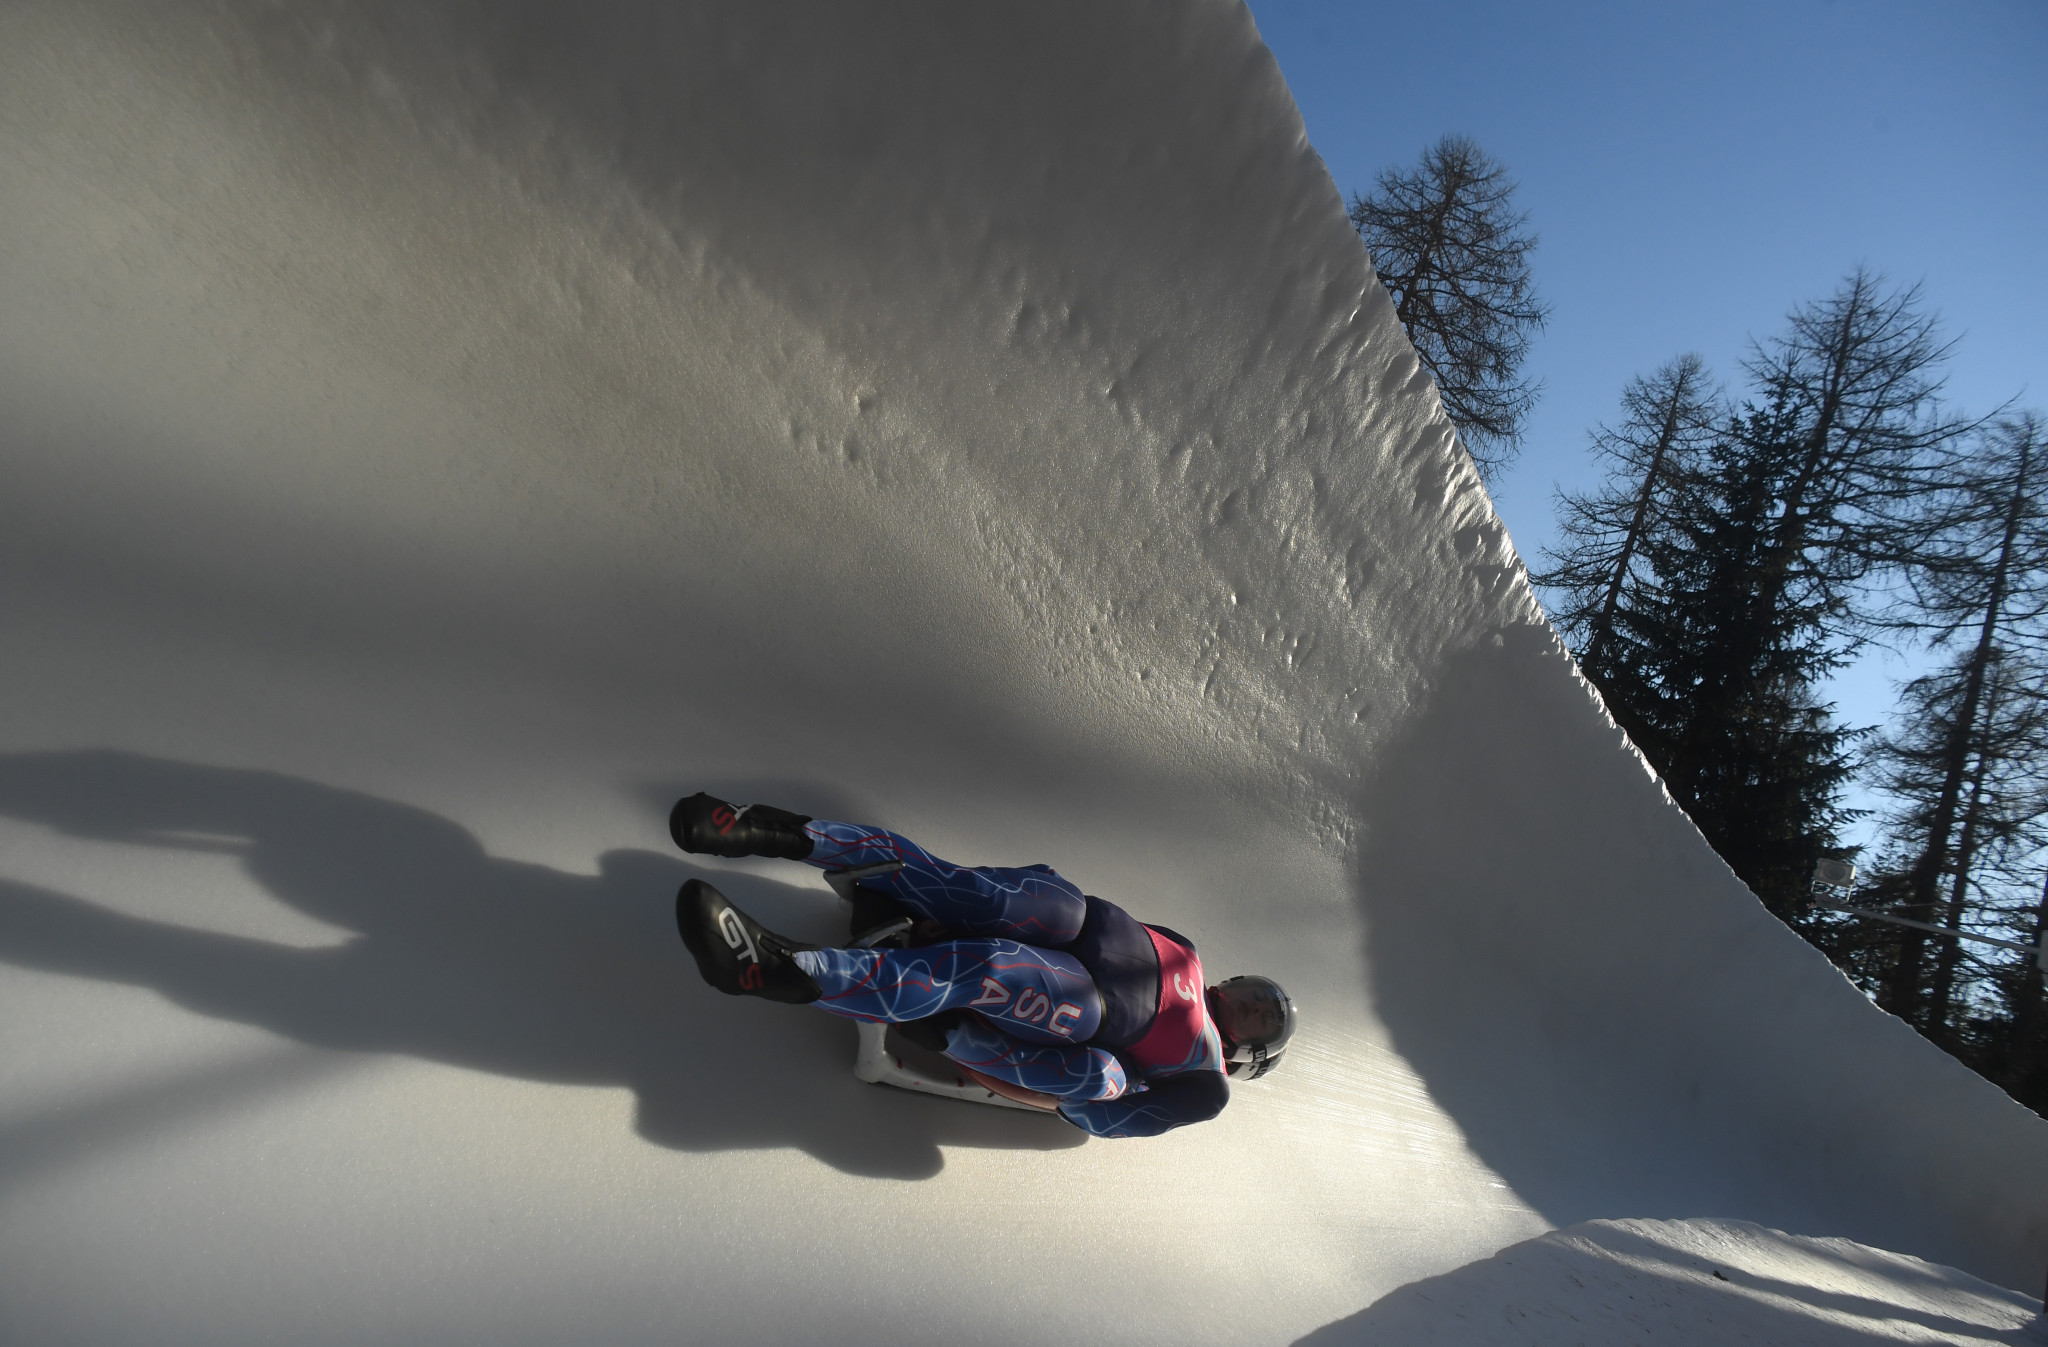 USA Luge and Team Worldwide extend partnership until Milan Cortina 2026